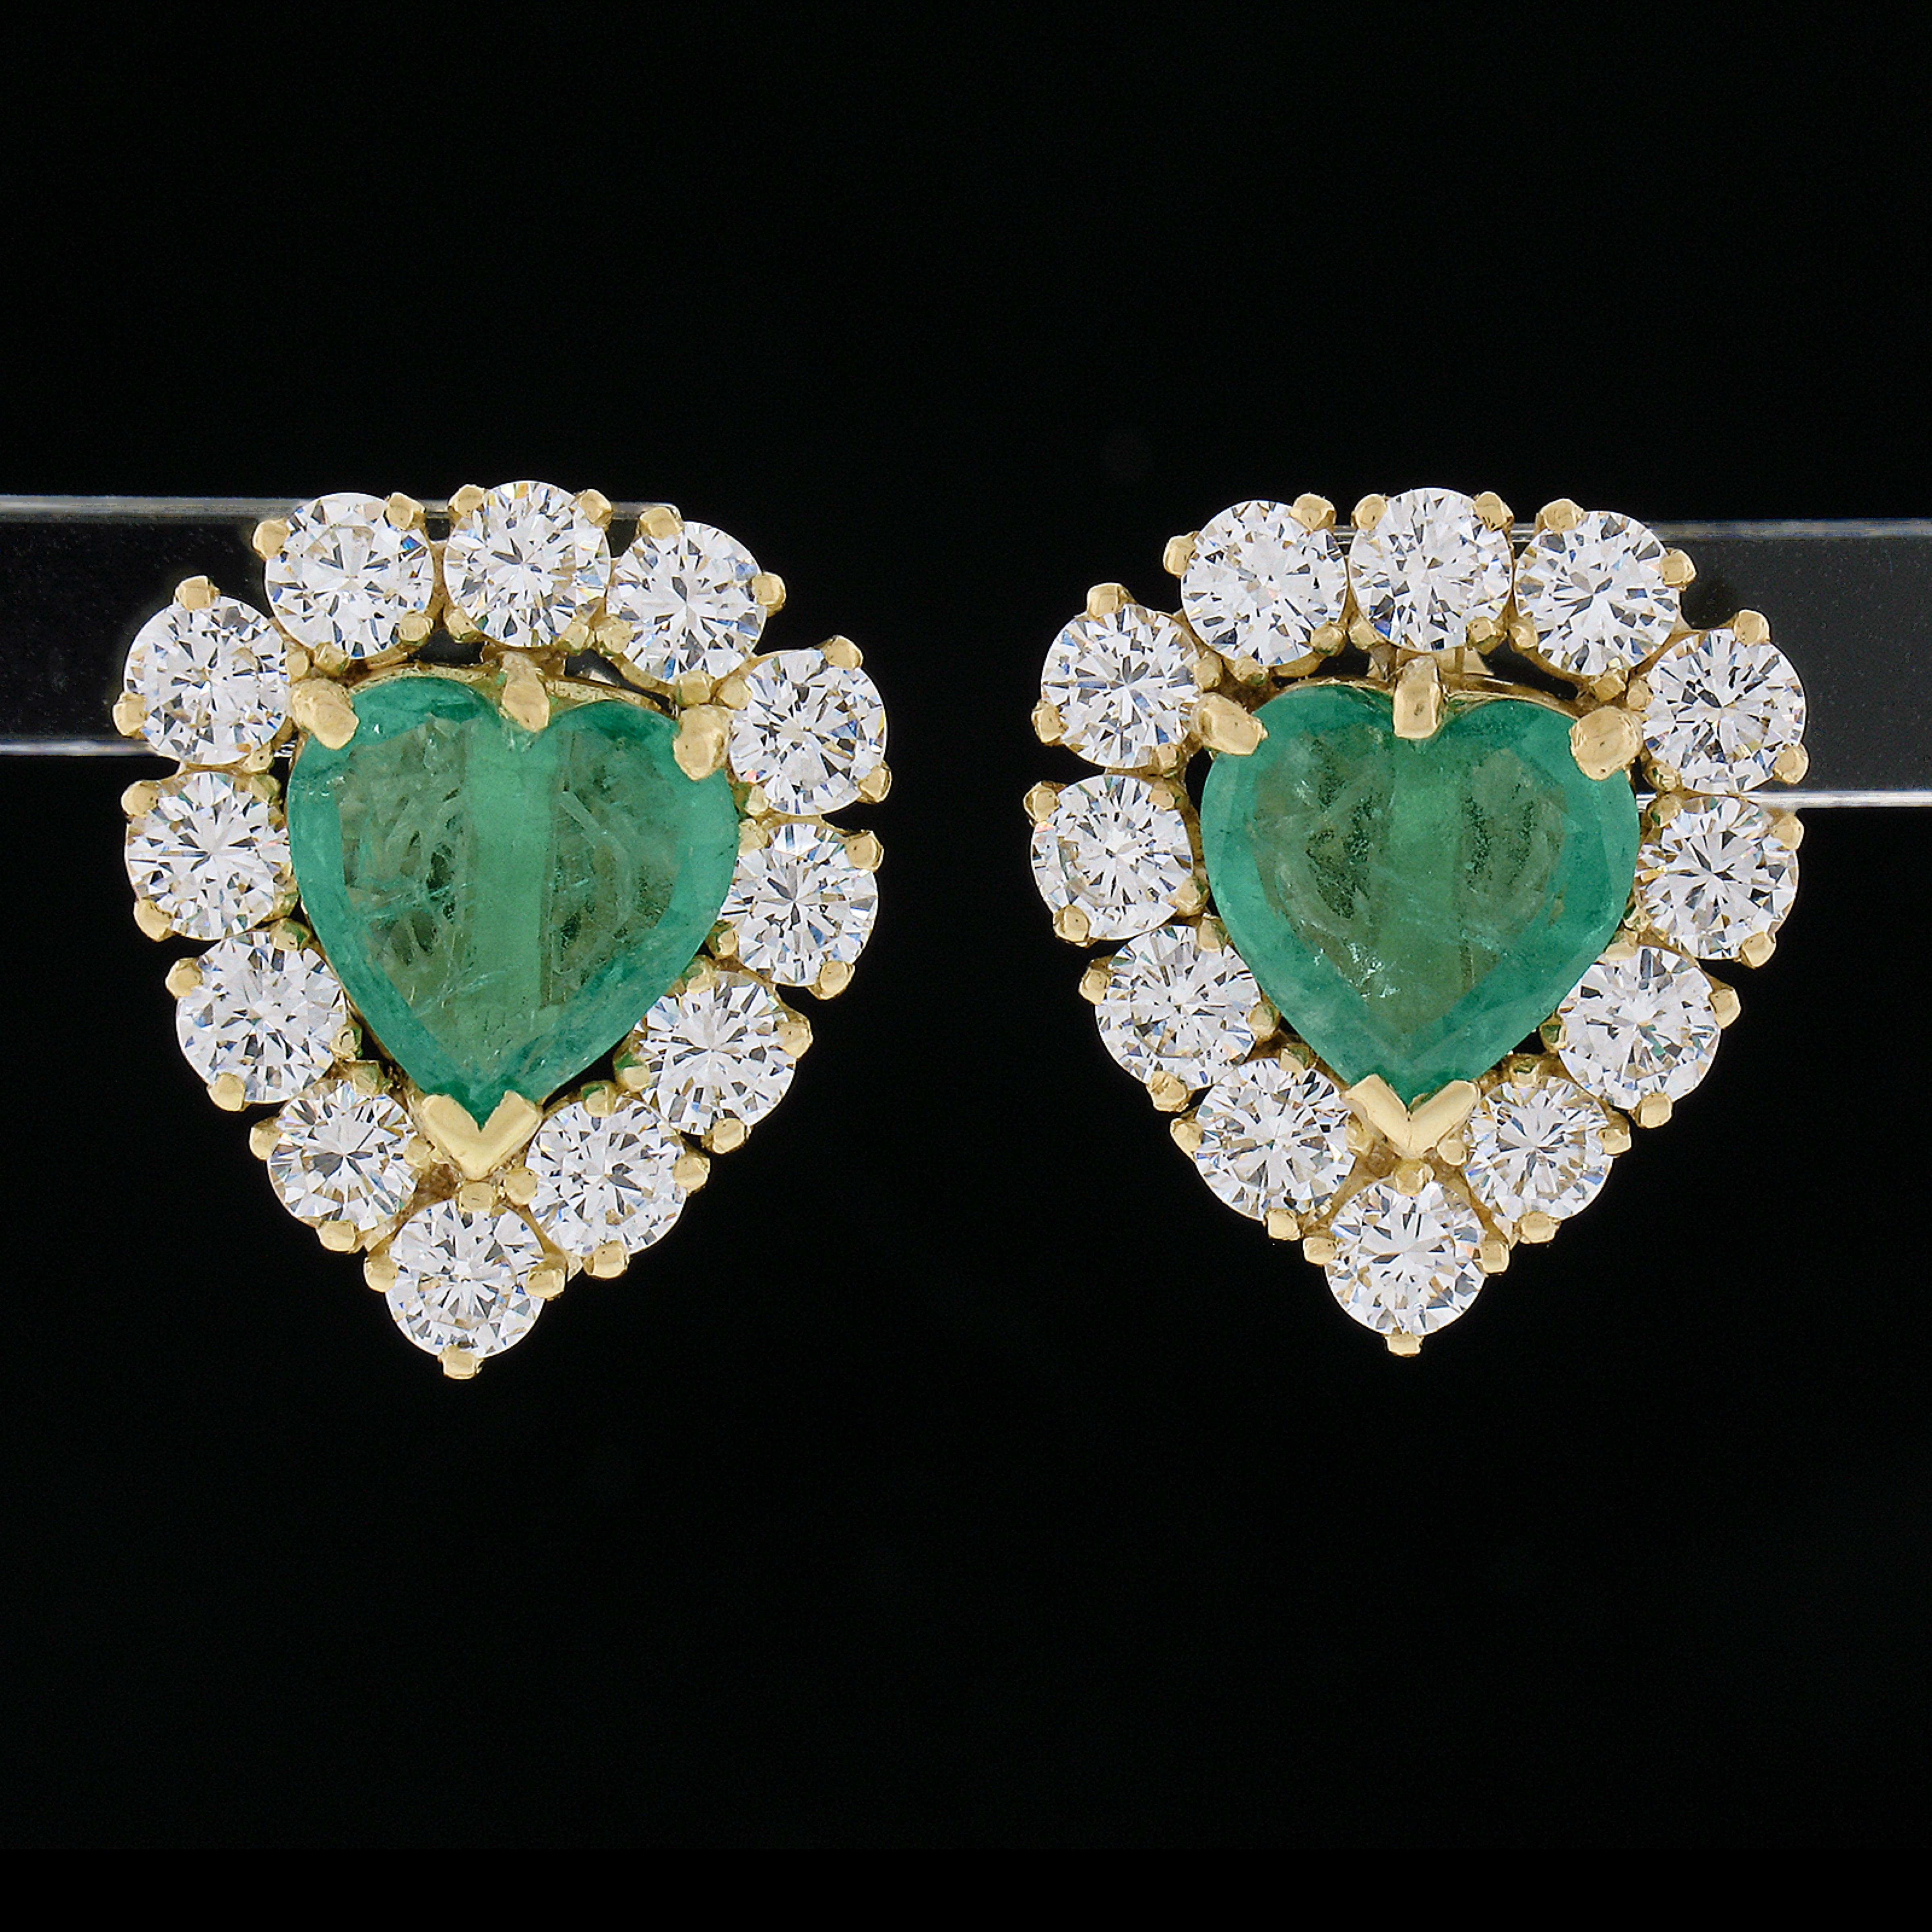 --Stone(s):--
(2) Natural Genuine Emeralds - Heart Brilliant Cut - Prong Set - Nice Match Vivid Green Color - 7.1-7.3x7mm - 1.50-1.80ctw (approx.)
(24) Natural Genuine Diamonds - Round Brilliant Cut - Prong Set - F/G Color - VS1/VS2 Clarity -